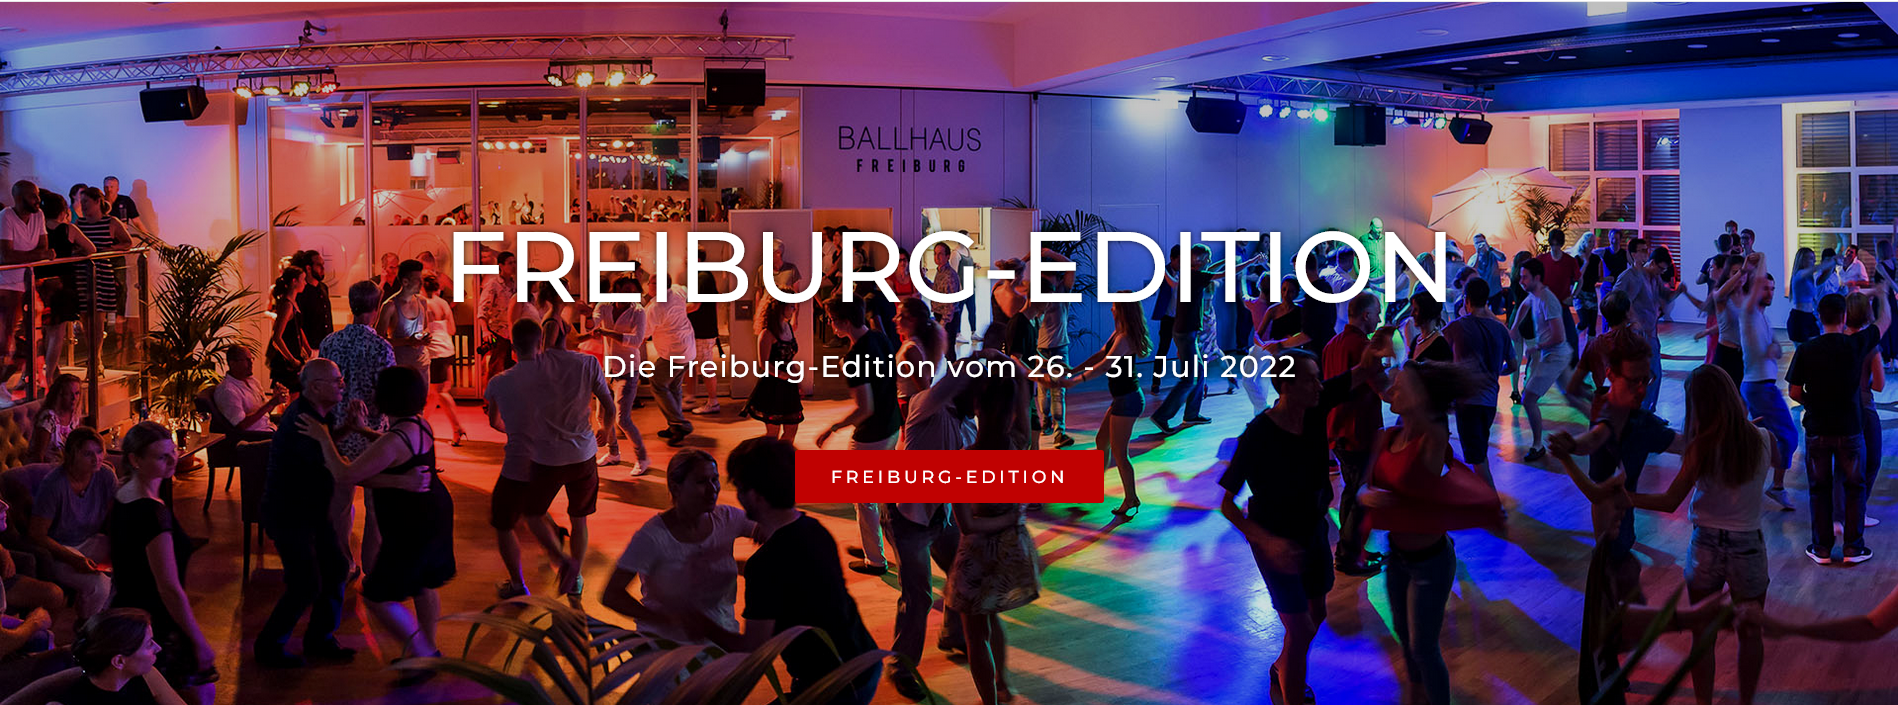 You are currently viewing Euro Dance Festival Freiburg-Edition im Juli